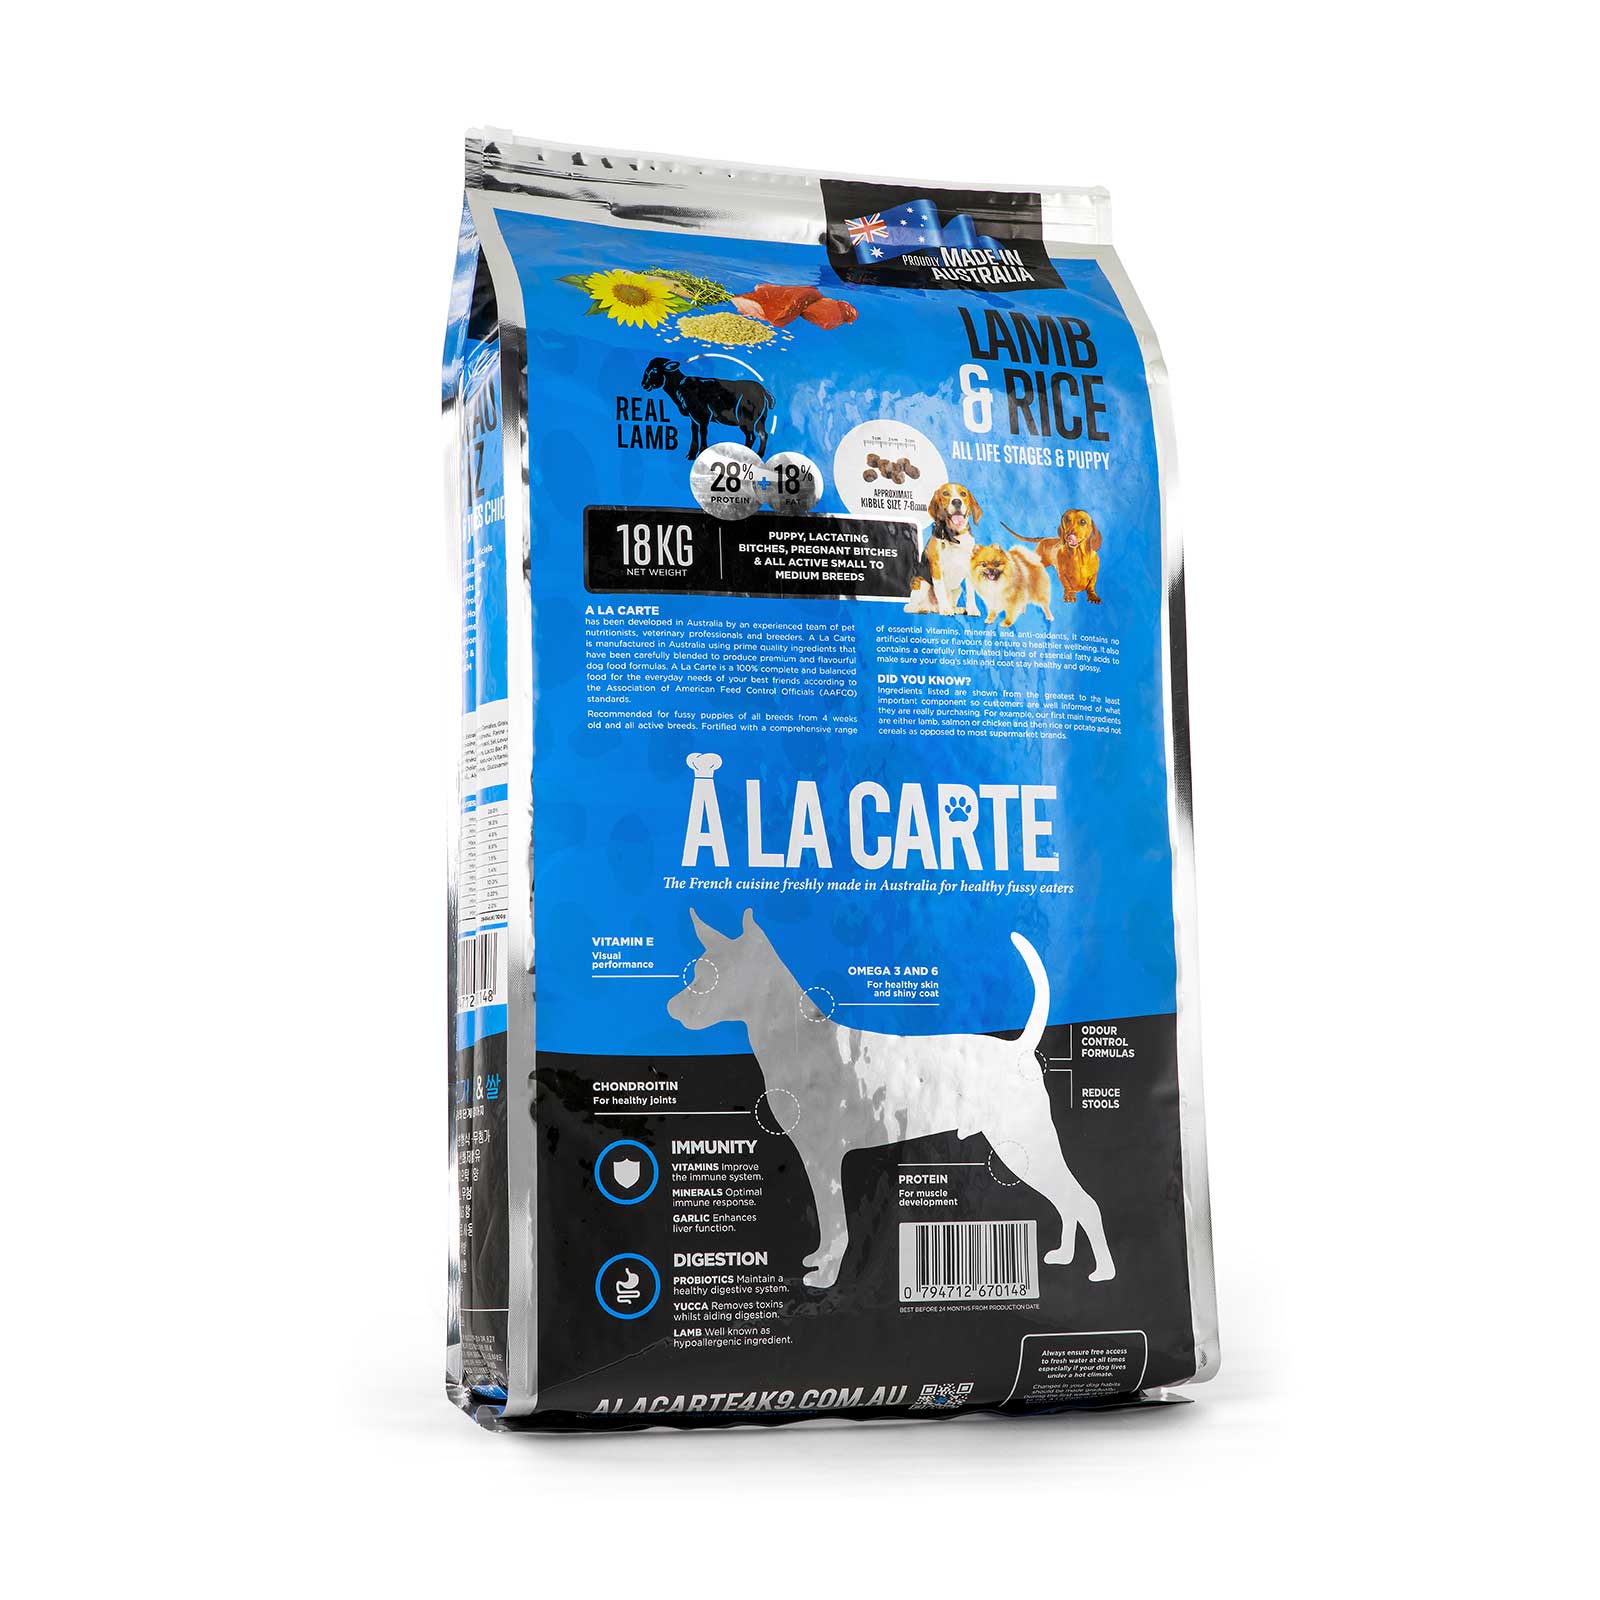 A La Carte Dog Food All Life Stages Lamb & Rice